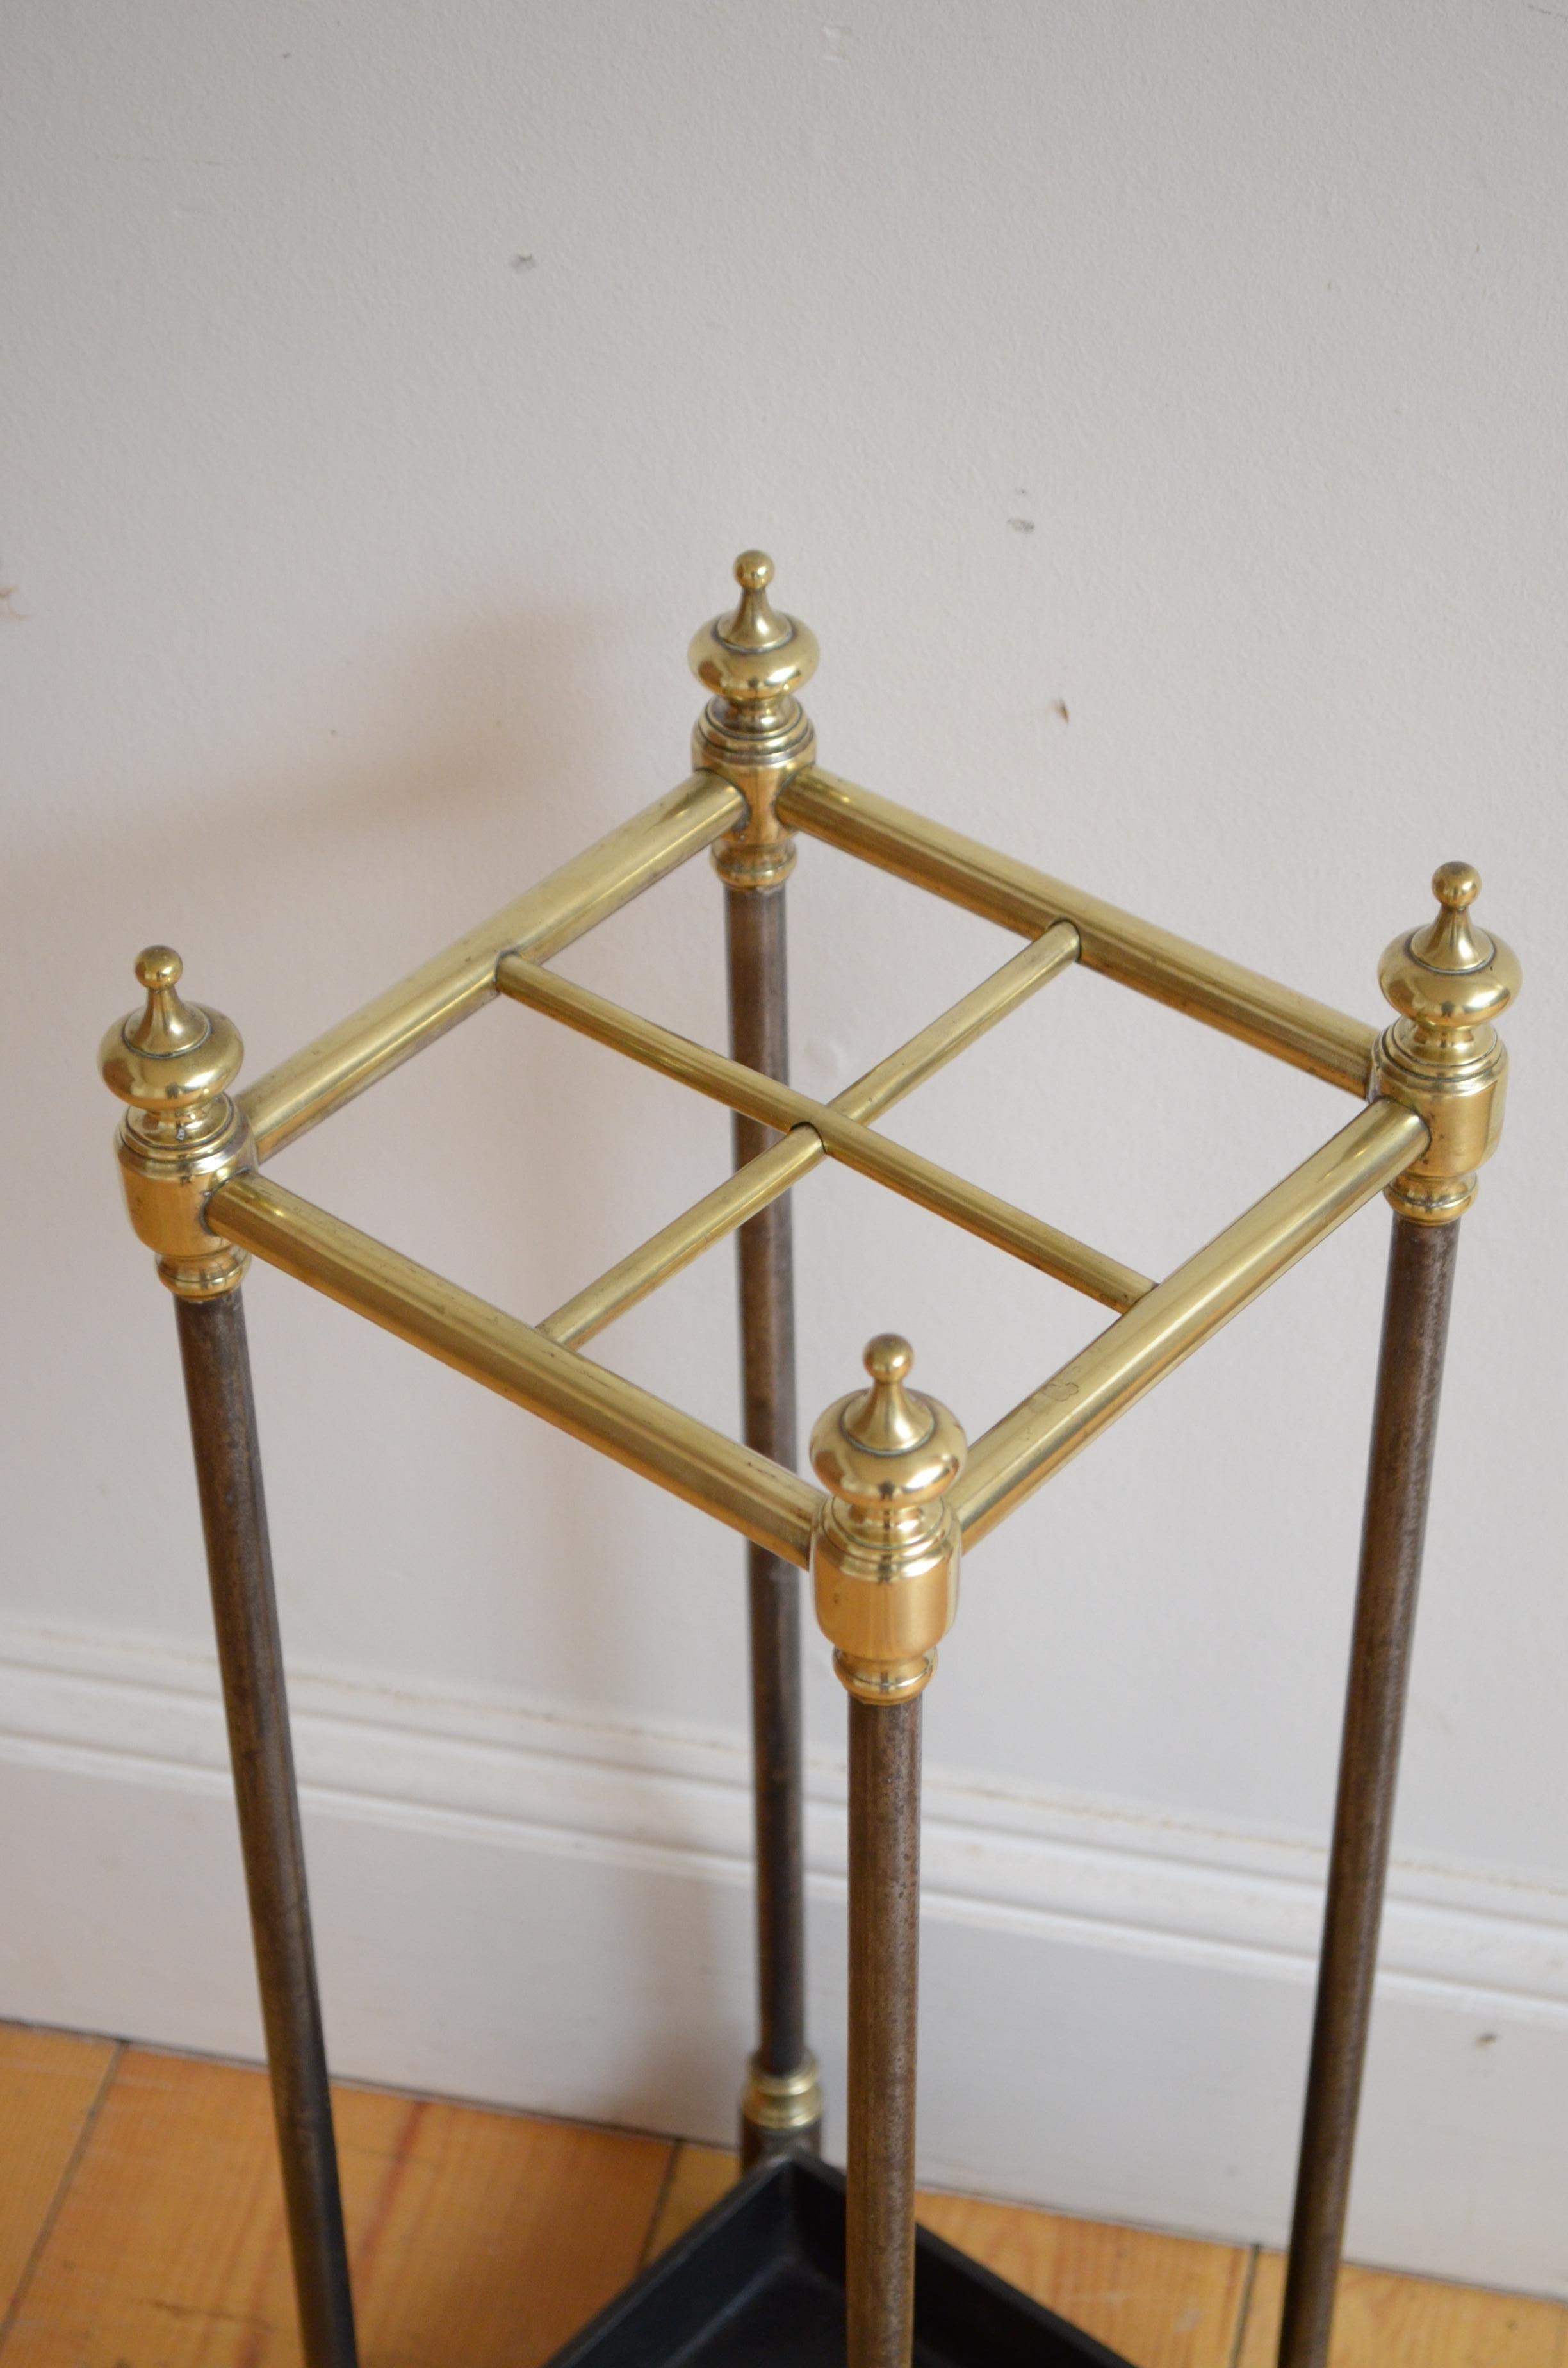 K0215 English Victorian brass umbrella stand with four compartments, decorative brass finials, steel uprights and cast iron base. This antique umbrella stand has been syamthetically cleaned and polished and it is in home ready condition.